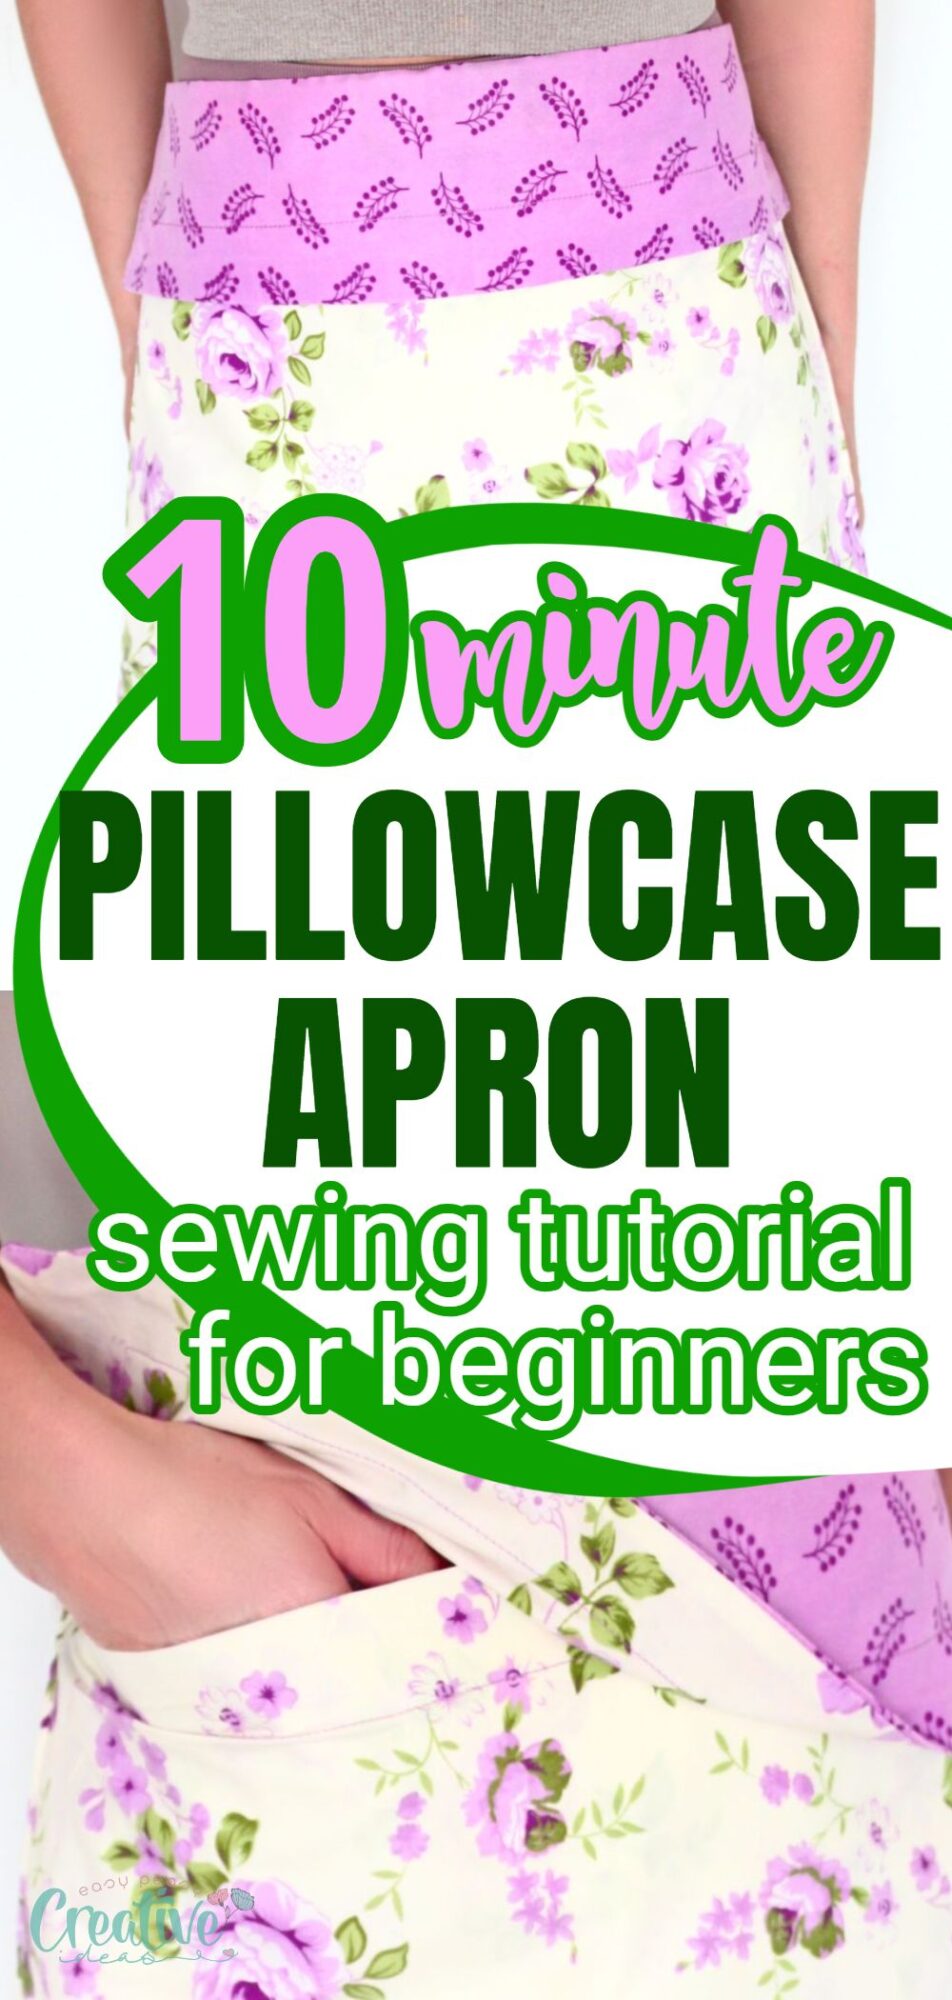 A step-by-step guide to sewing a delightful pillowcase apron from an old pillowcase. Perfect for beginners, this 10-minute tutorial is a must-try for sewing enthusiasts!